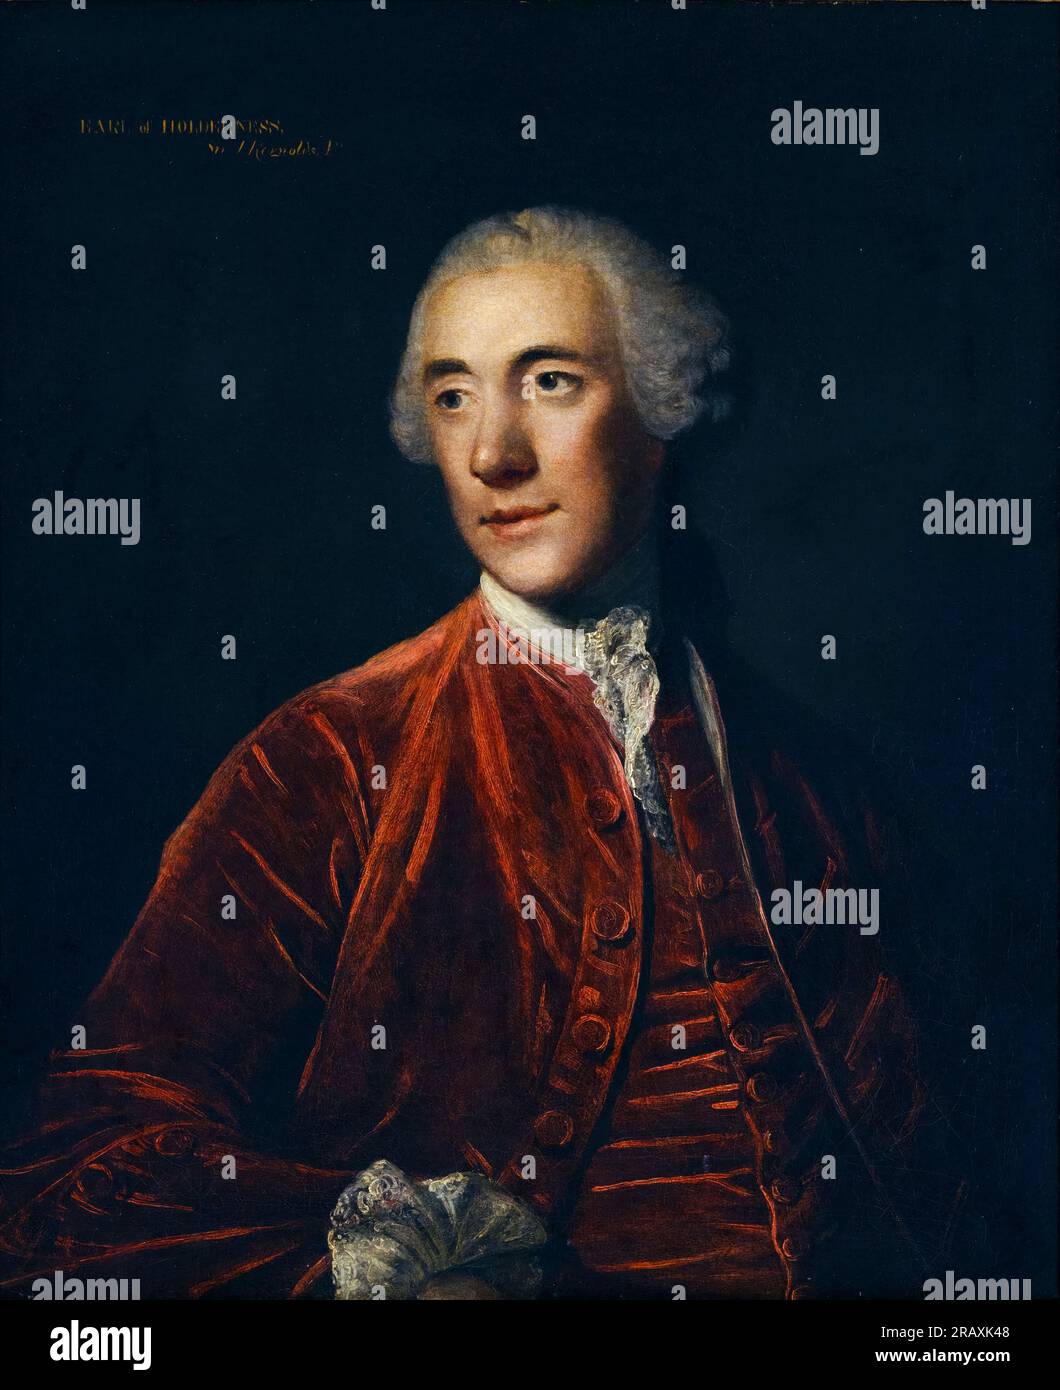 Robert Darcy, 4th Earl of Holderness (1717-1778), British Diplomat and Politician, portrait painting in oil on canvas by Sir Joshua Reynolds, 1775 Stock Photo